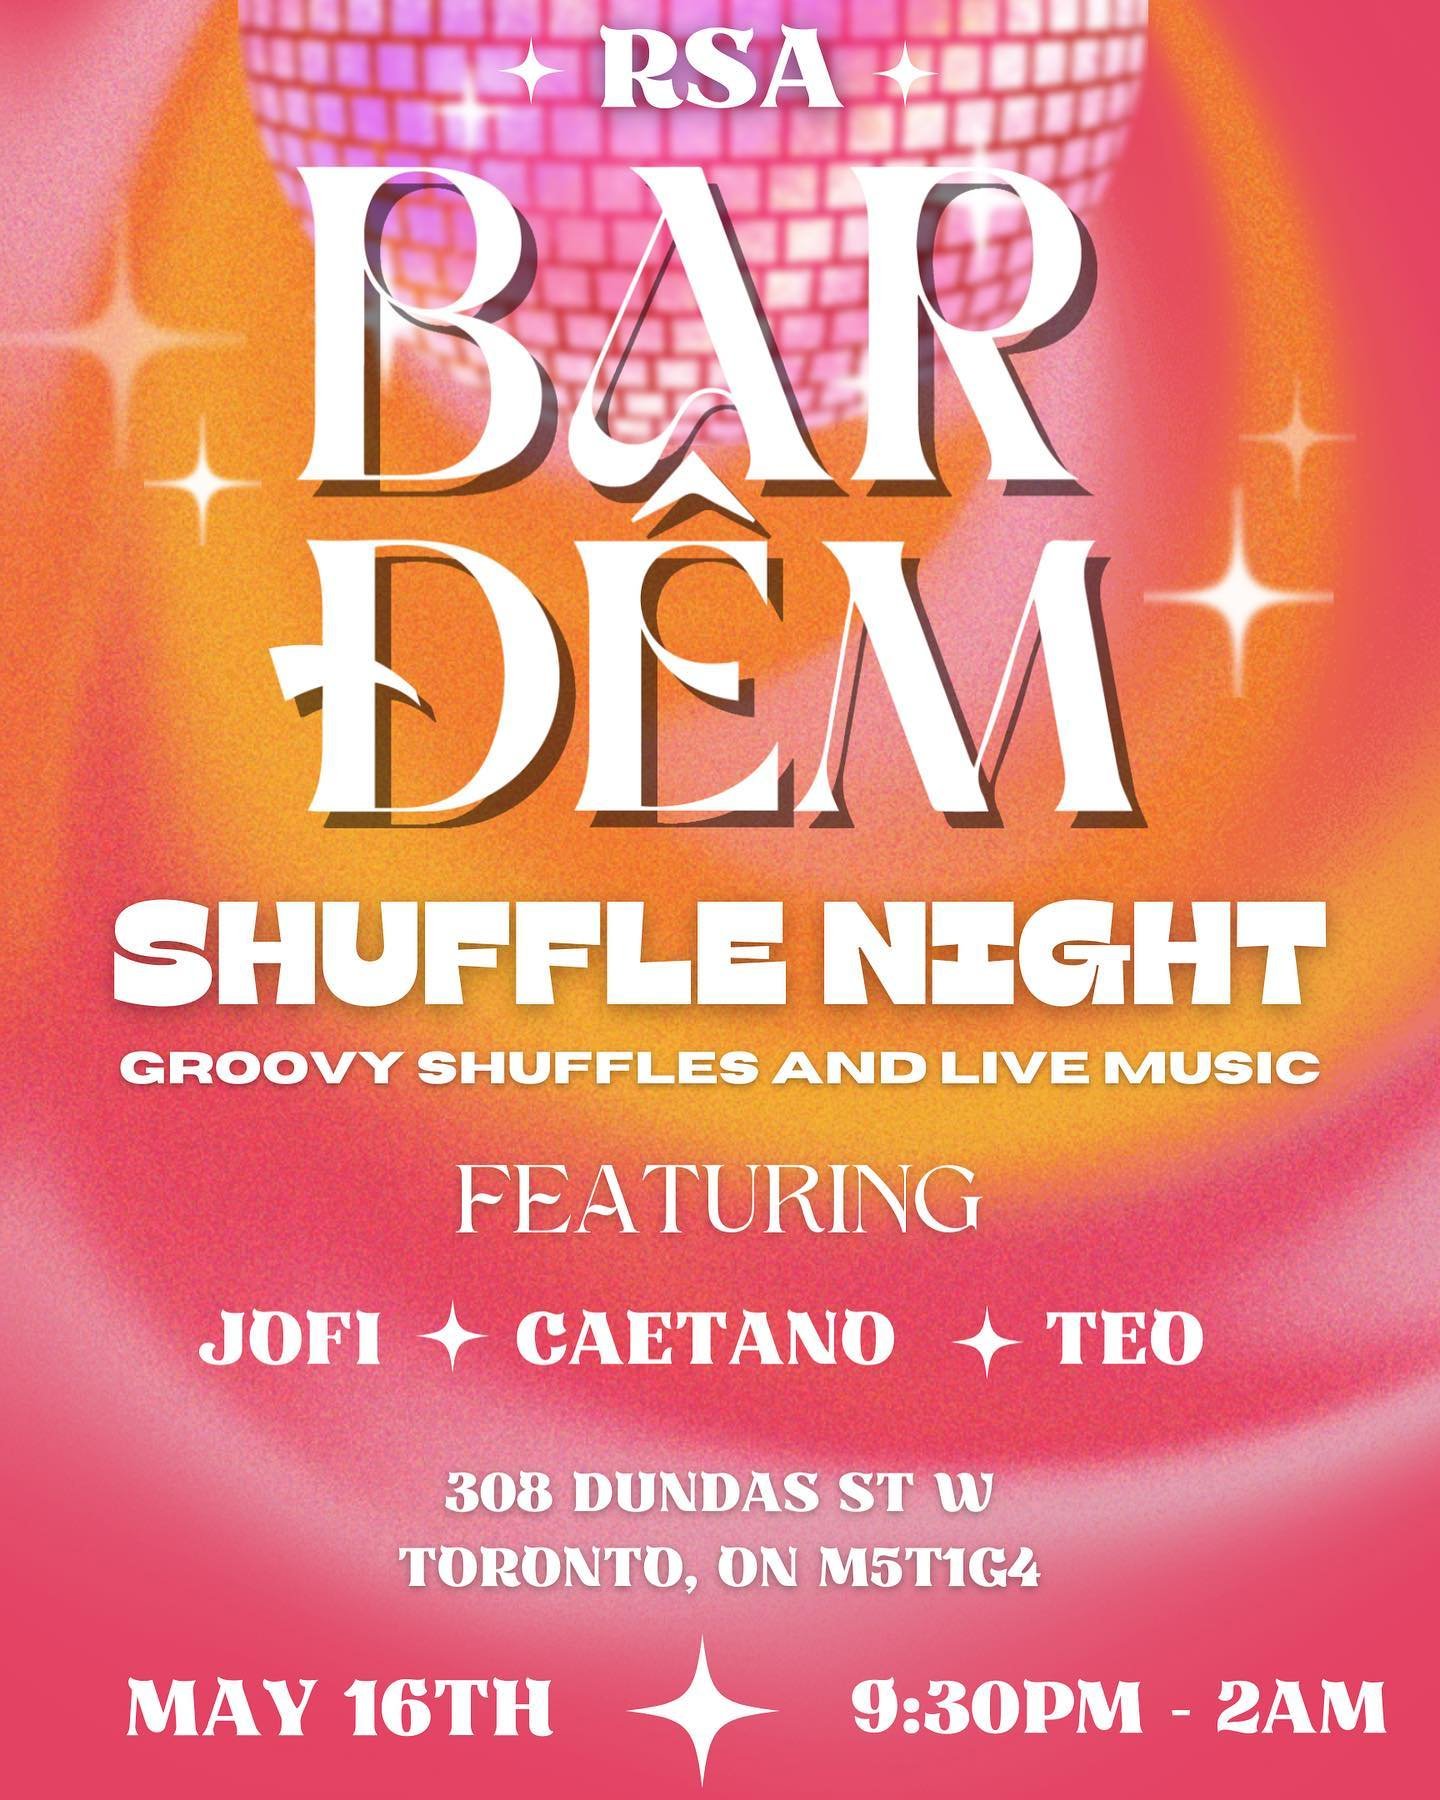 Introducing SHUFFLE NIGHT 🪩⭐️

This new and exciting event is being held at @bardemto on May 16th from 9:30pm till 2am 😍

Featuring special guest DJ&rsquo;s  @dj_jofi @caetano_to &amp; @tunesbyteo ✨

Entry is free, and there will be $5 mixed drinks